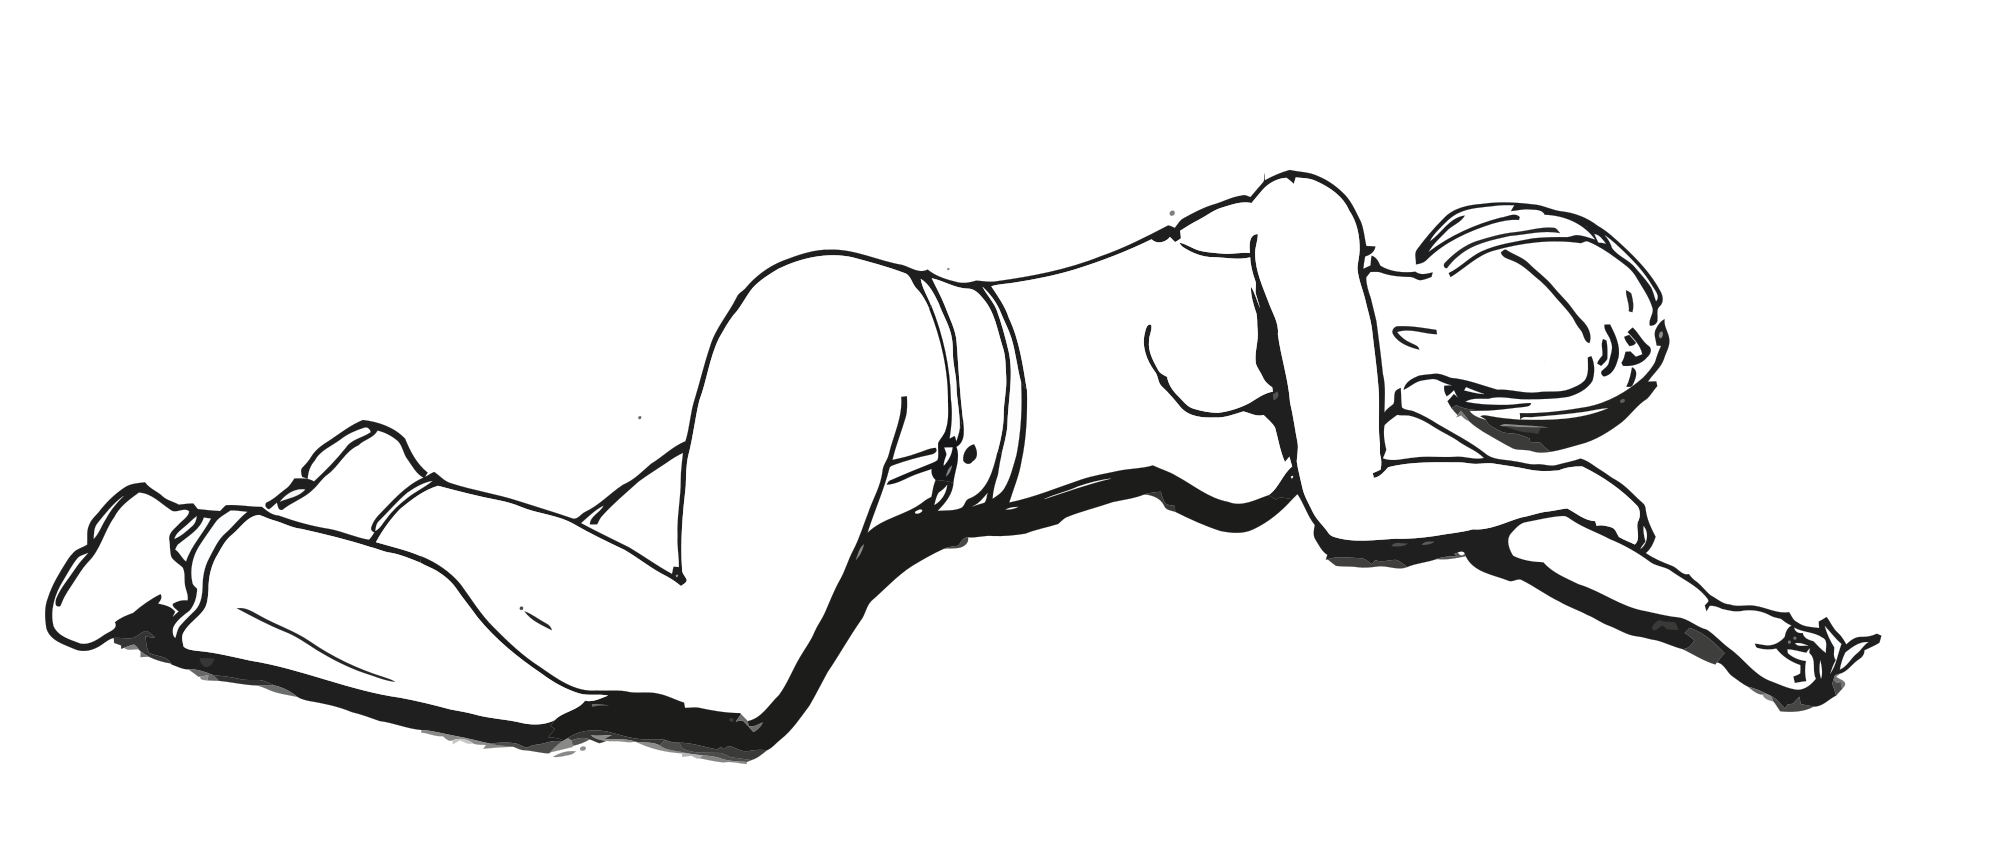 2000px-Recovery_position_svg